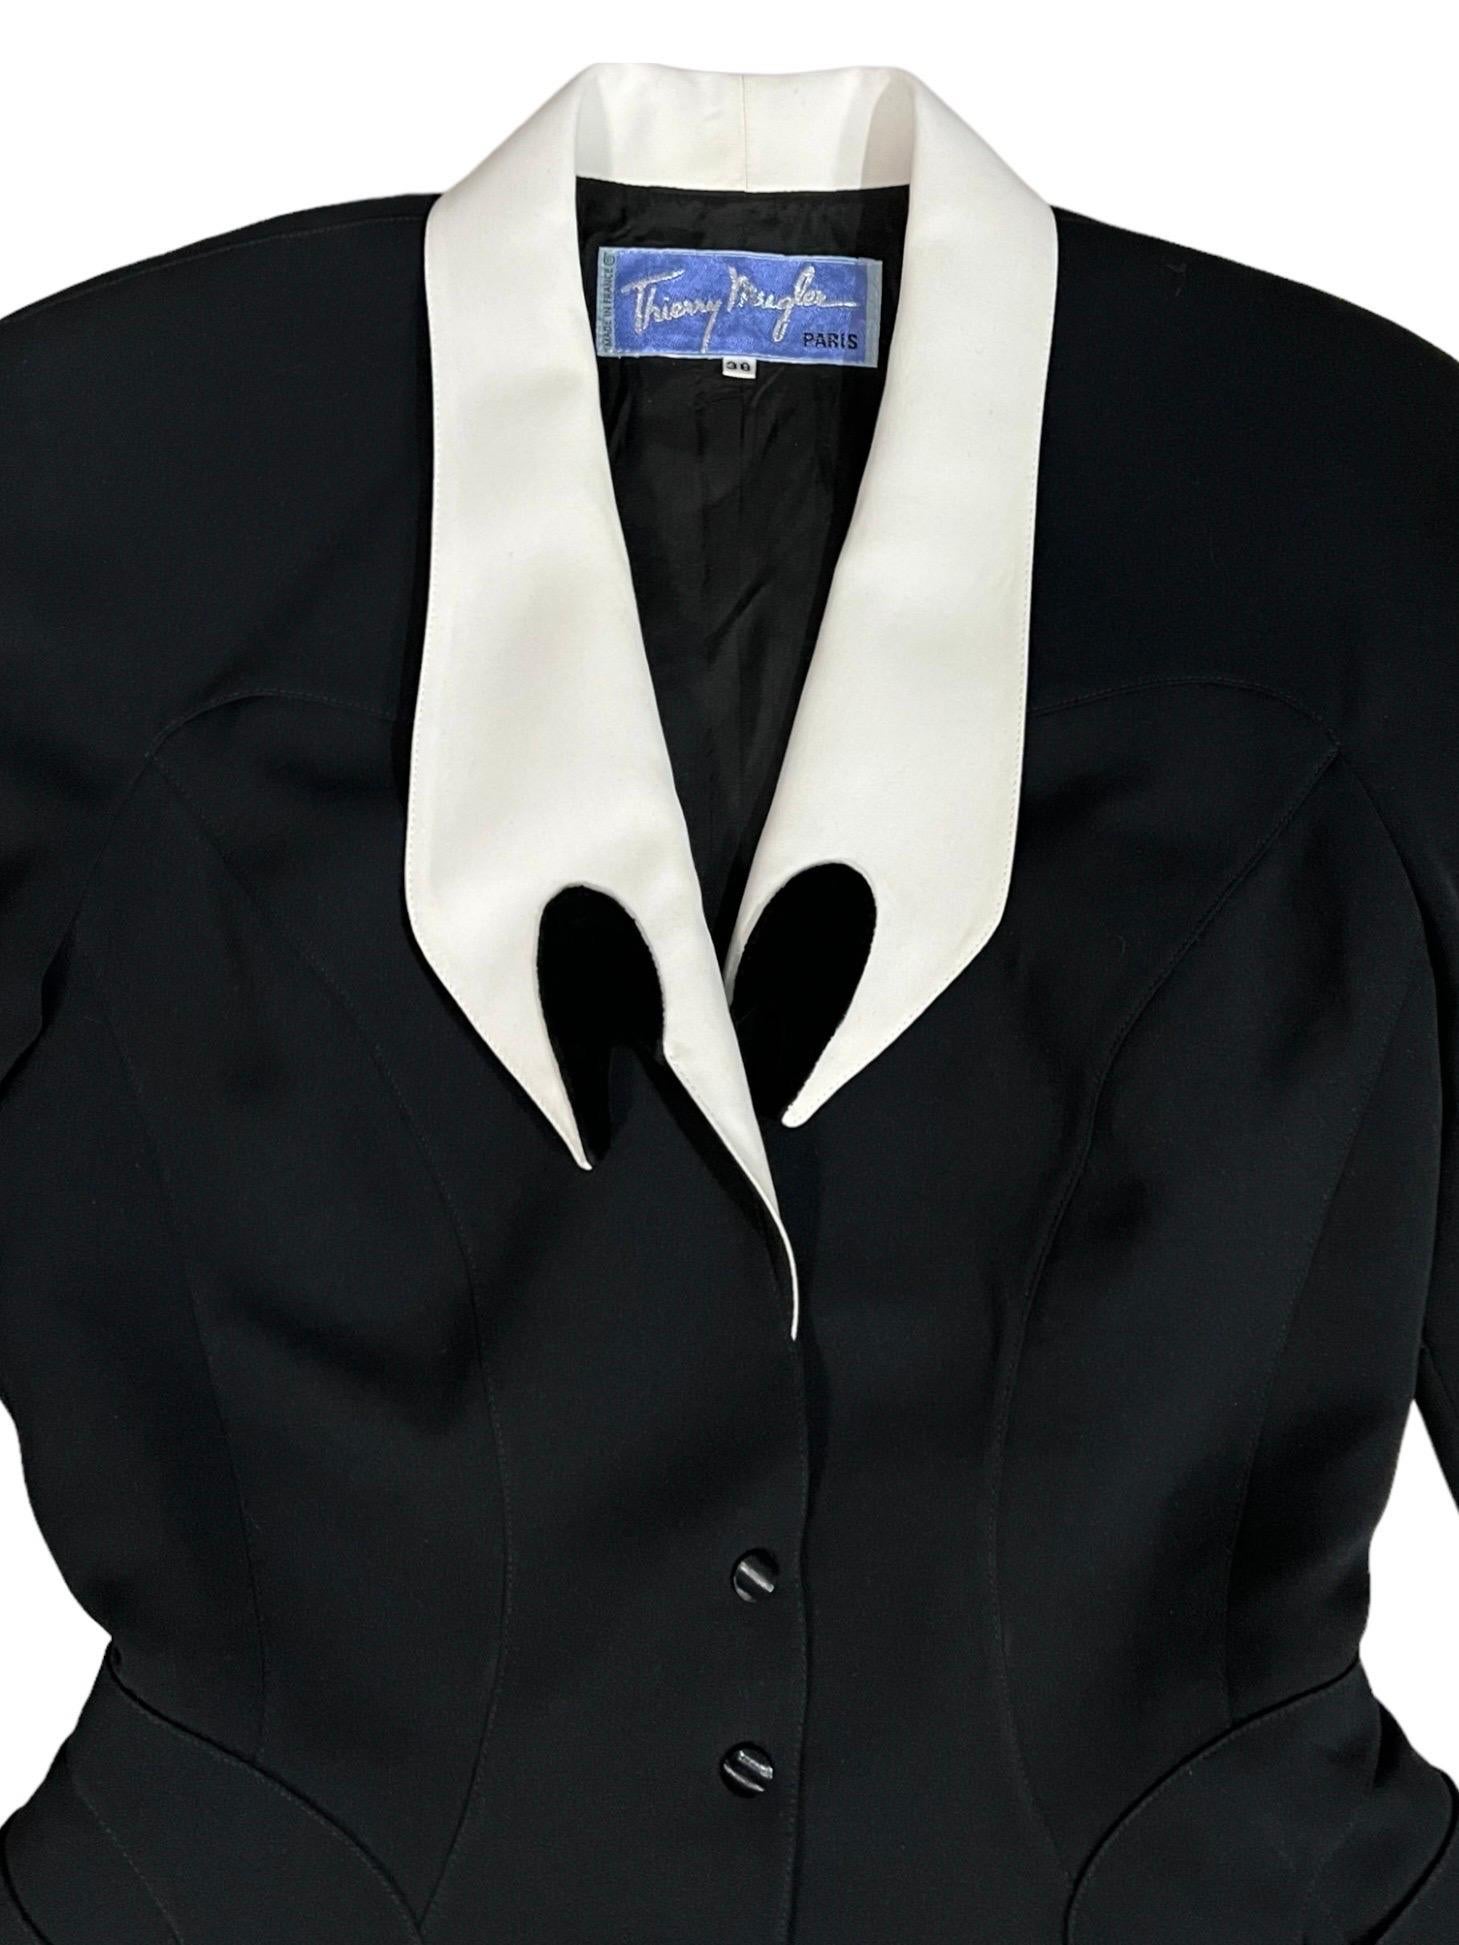 S/S 1992 Thierry Mugler Black Runway Jacket Dramatic White Collar For Sale 5